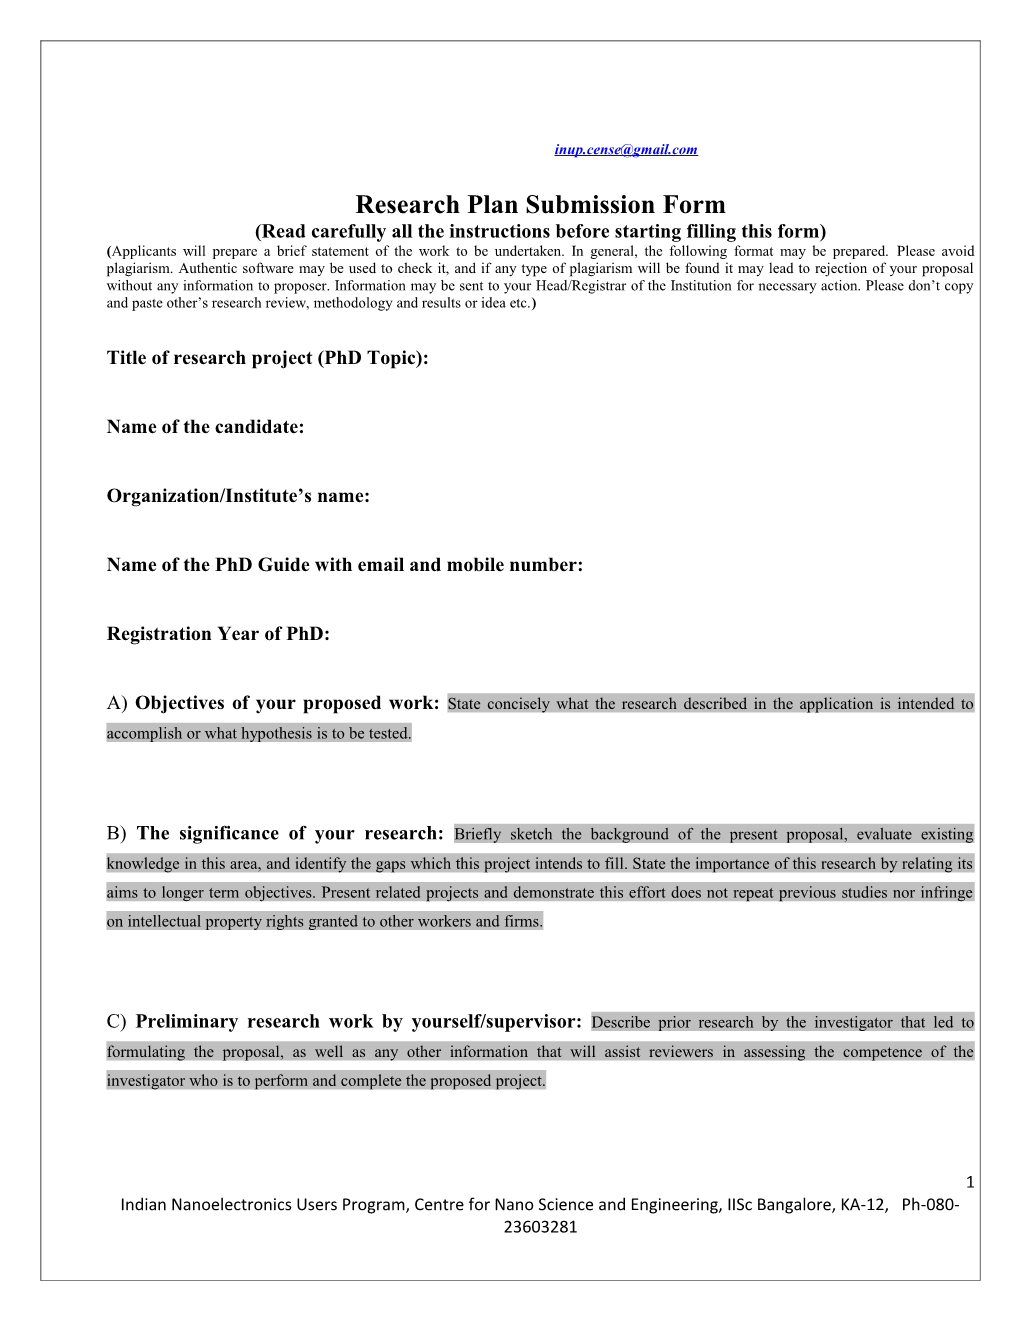 Research Plan Submission Form